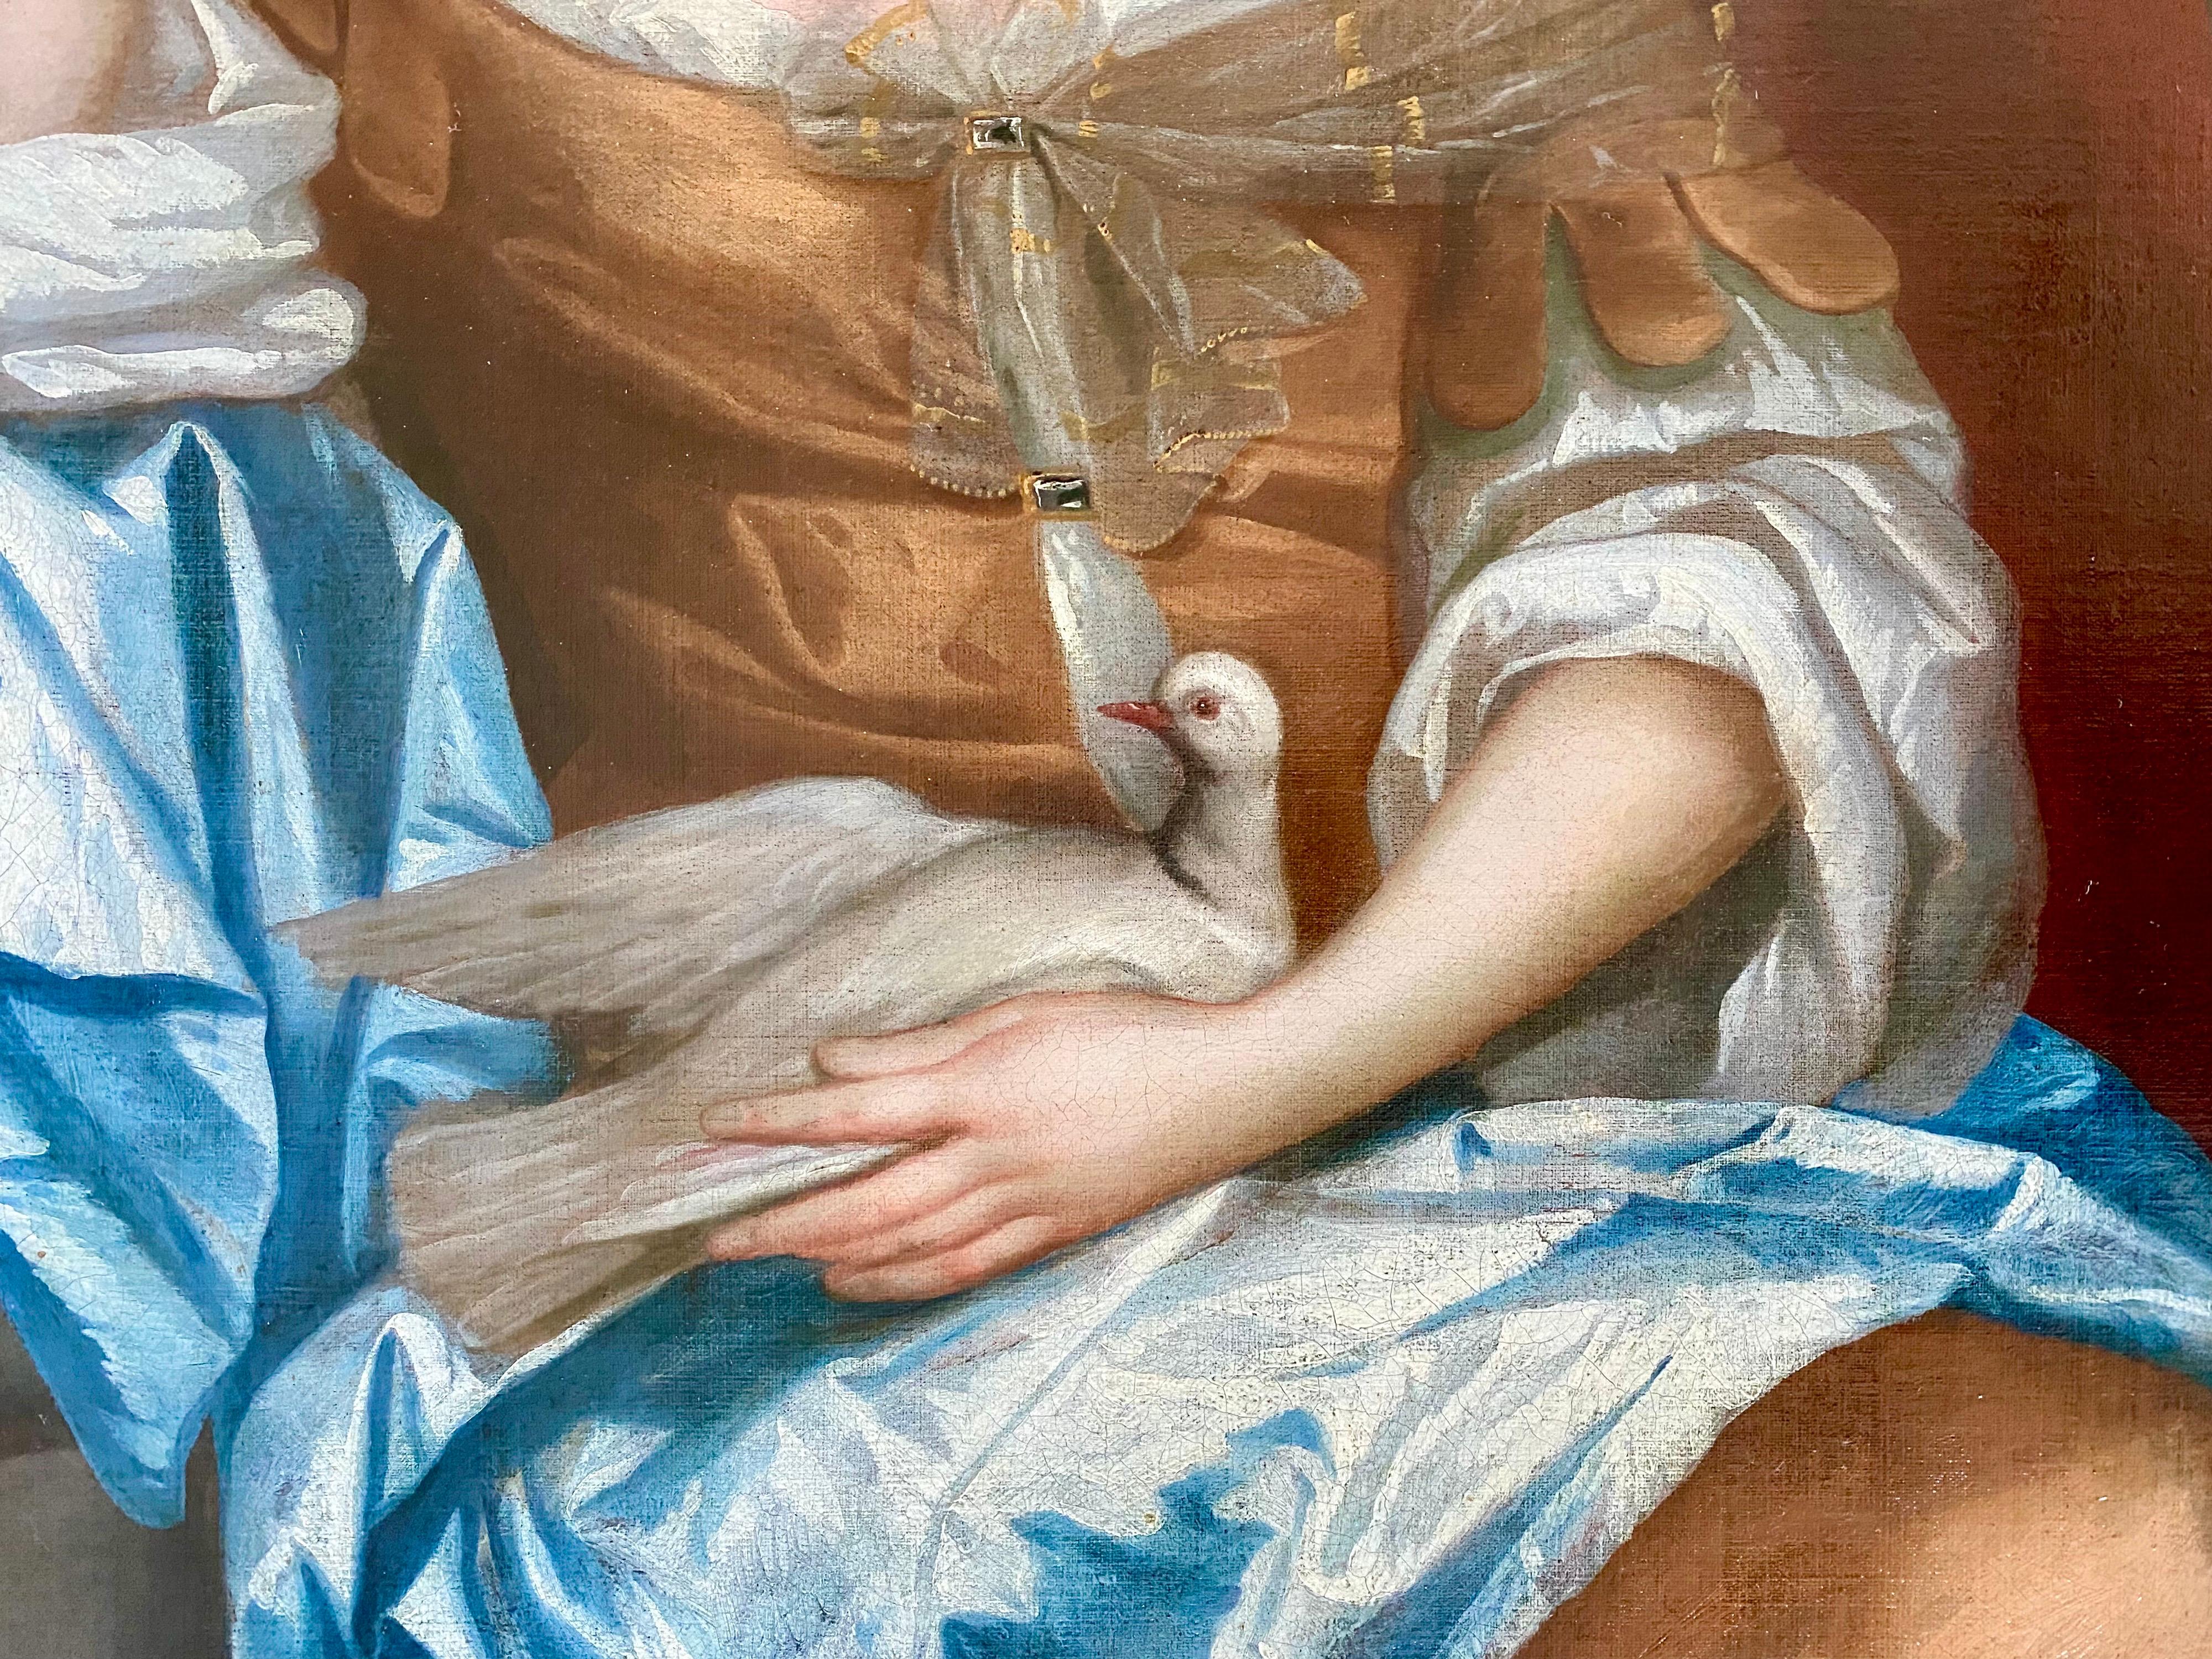 17th century beauty patches